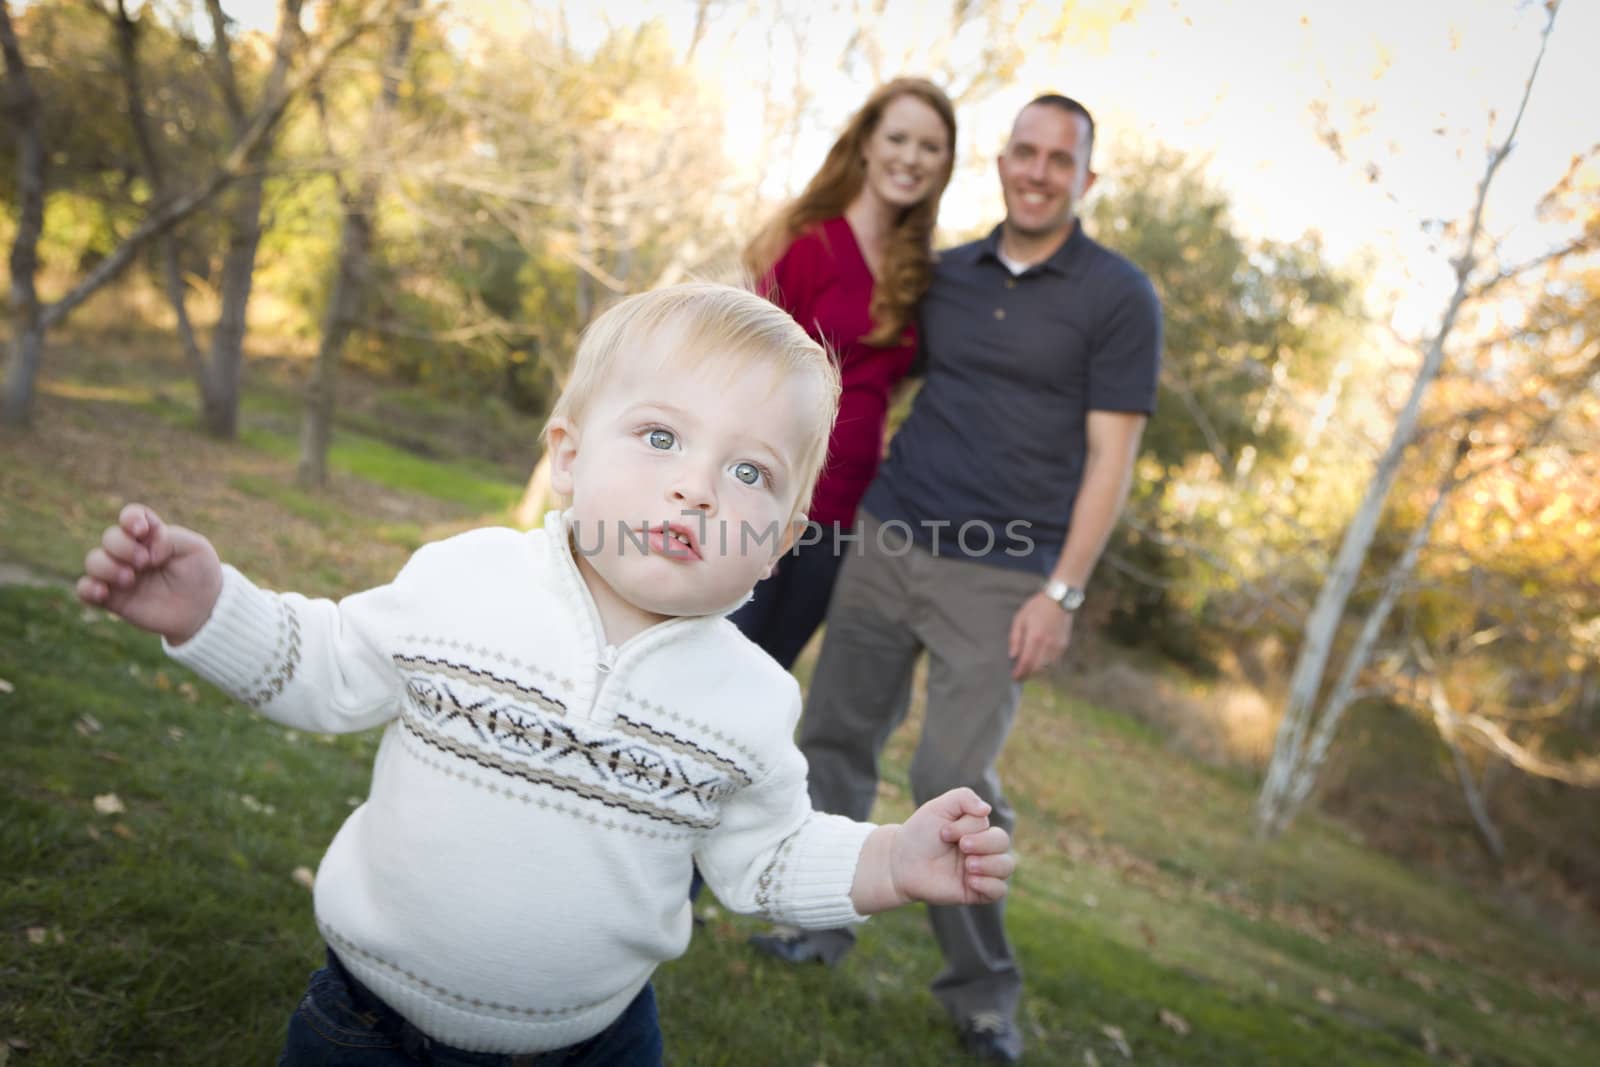 Cute Young Boy Walking in the park as Adoring Parents Look On From Behind.